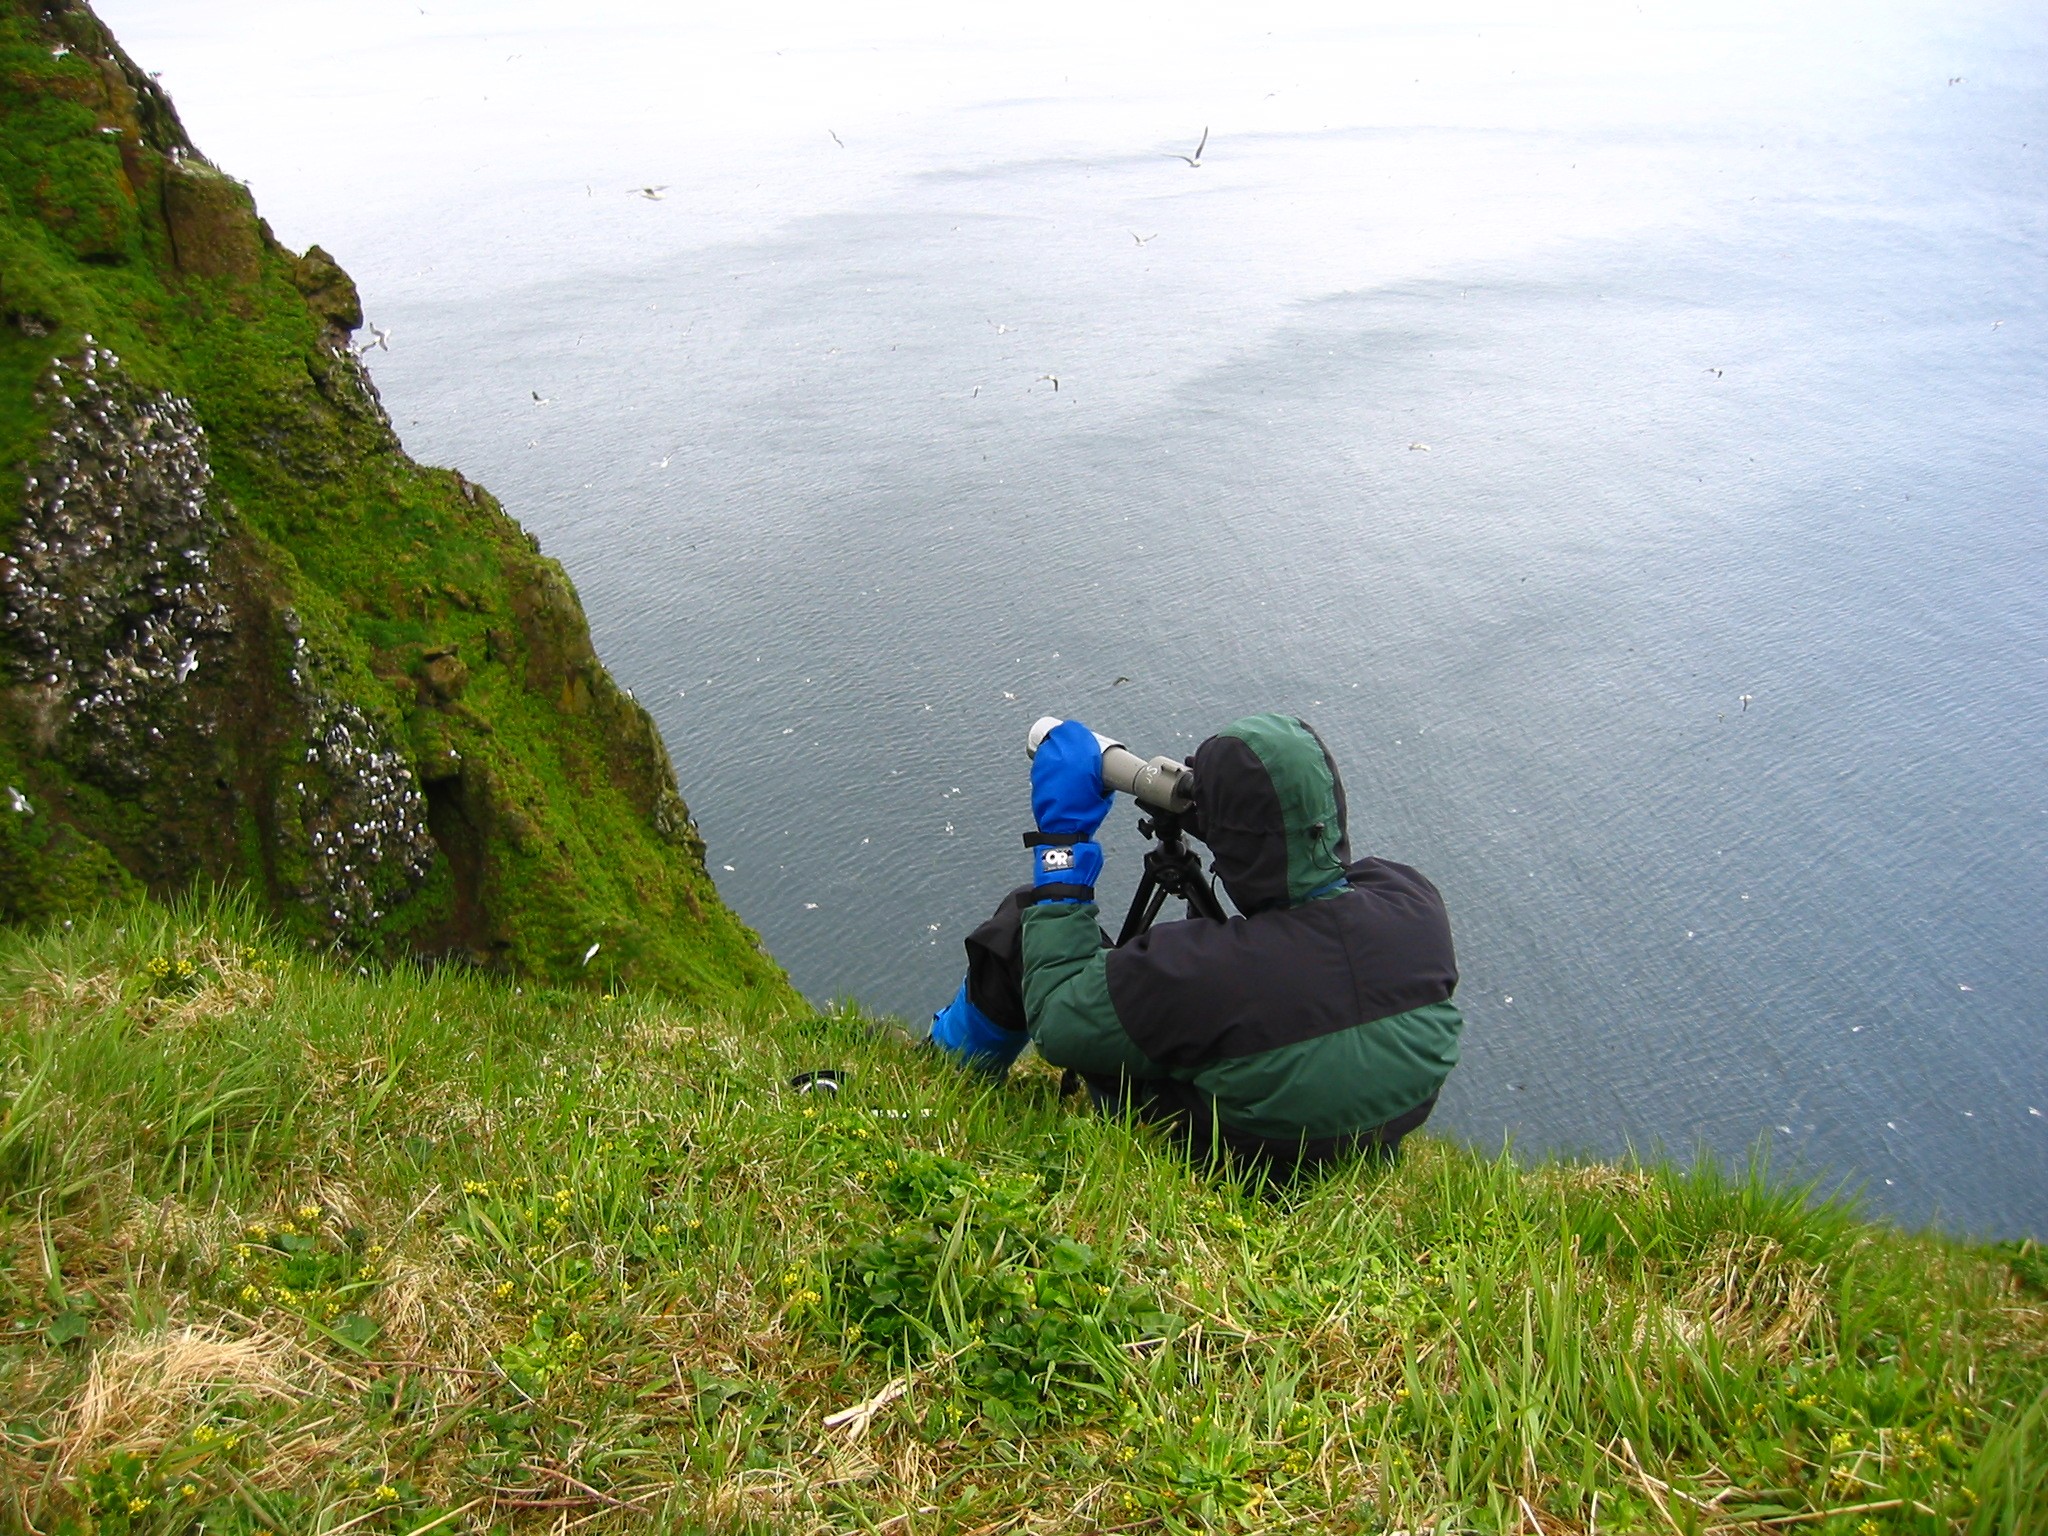 Recounting banded murres in the Pribilof Islands